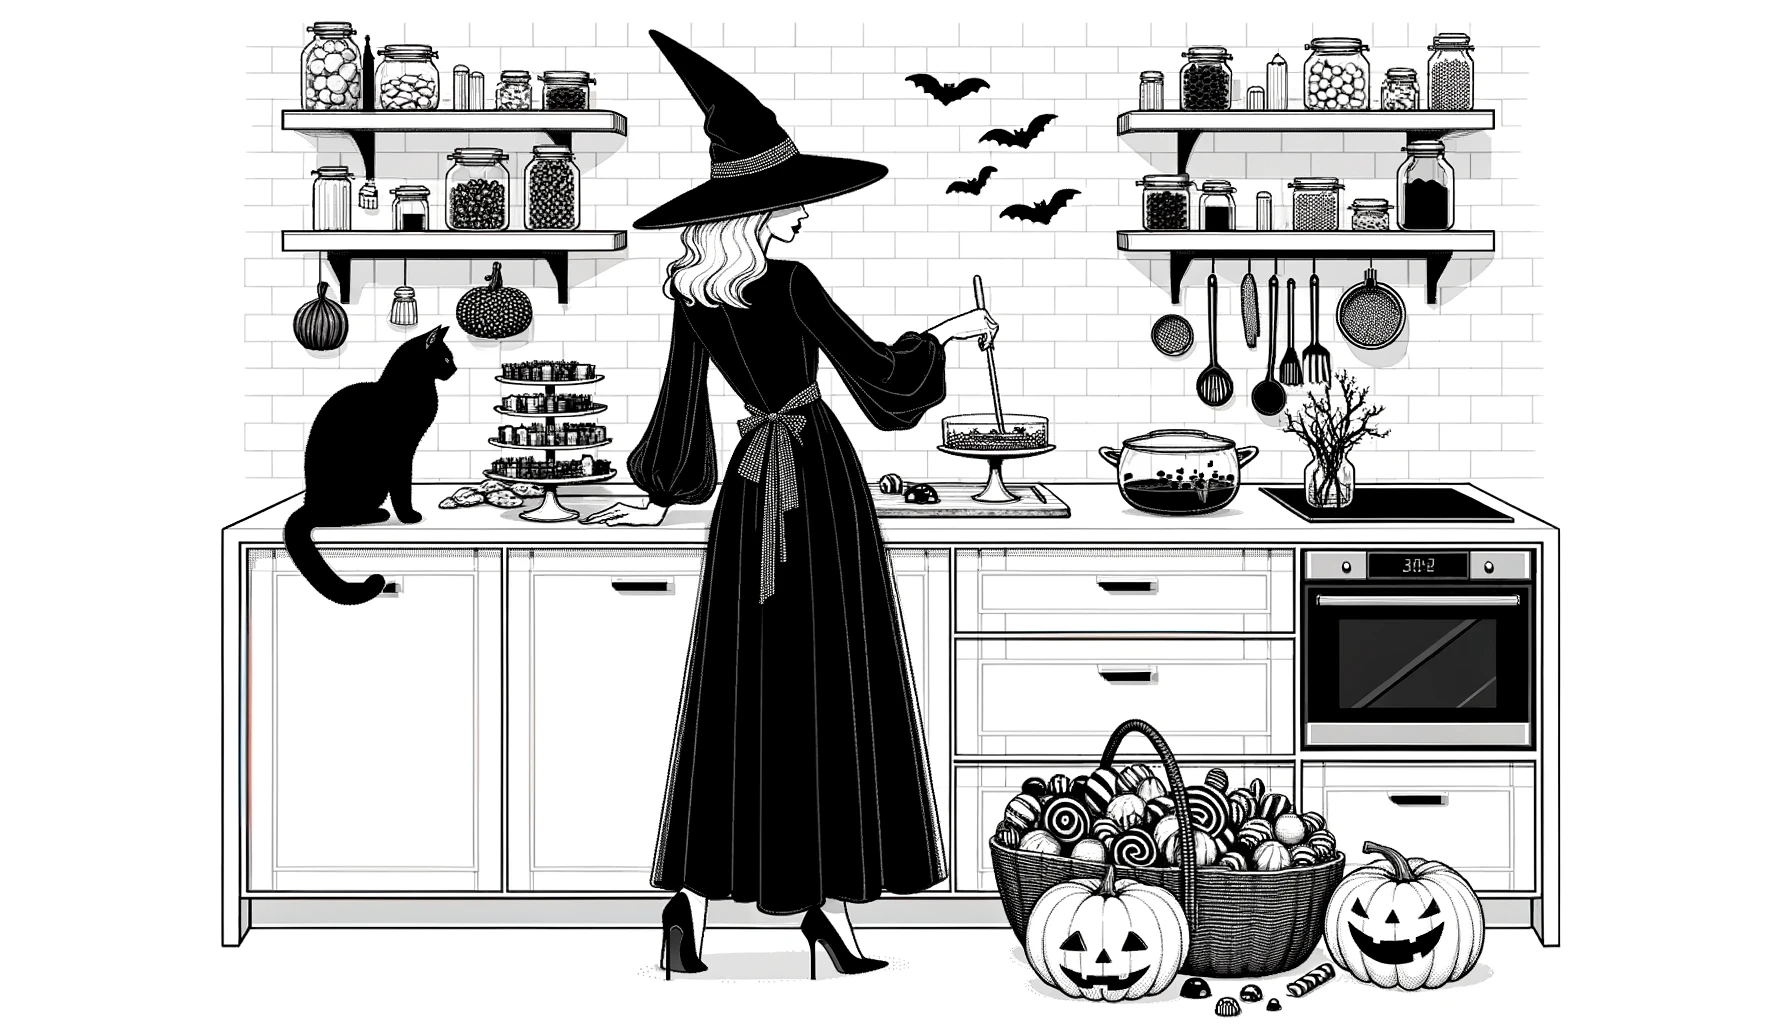 A woman, dressed in a chic witch costume, prepares Halloween treats